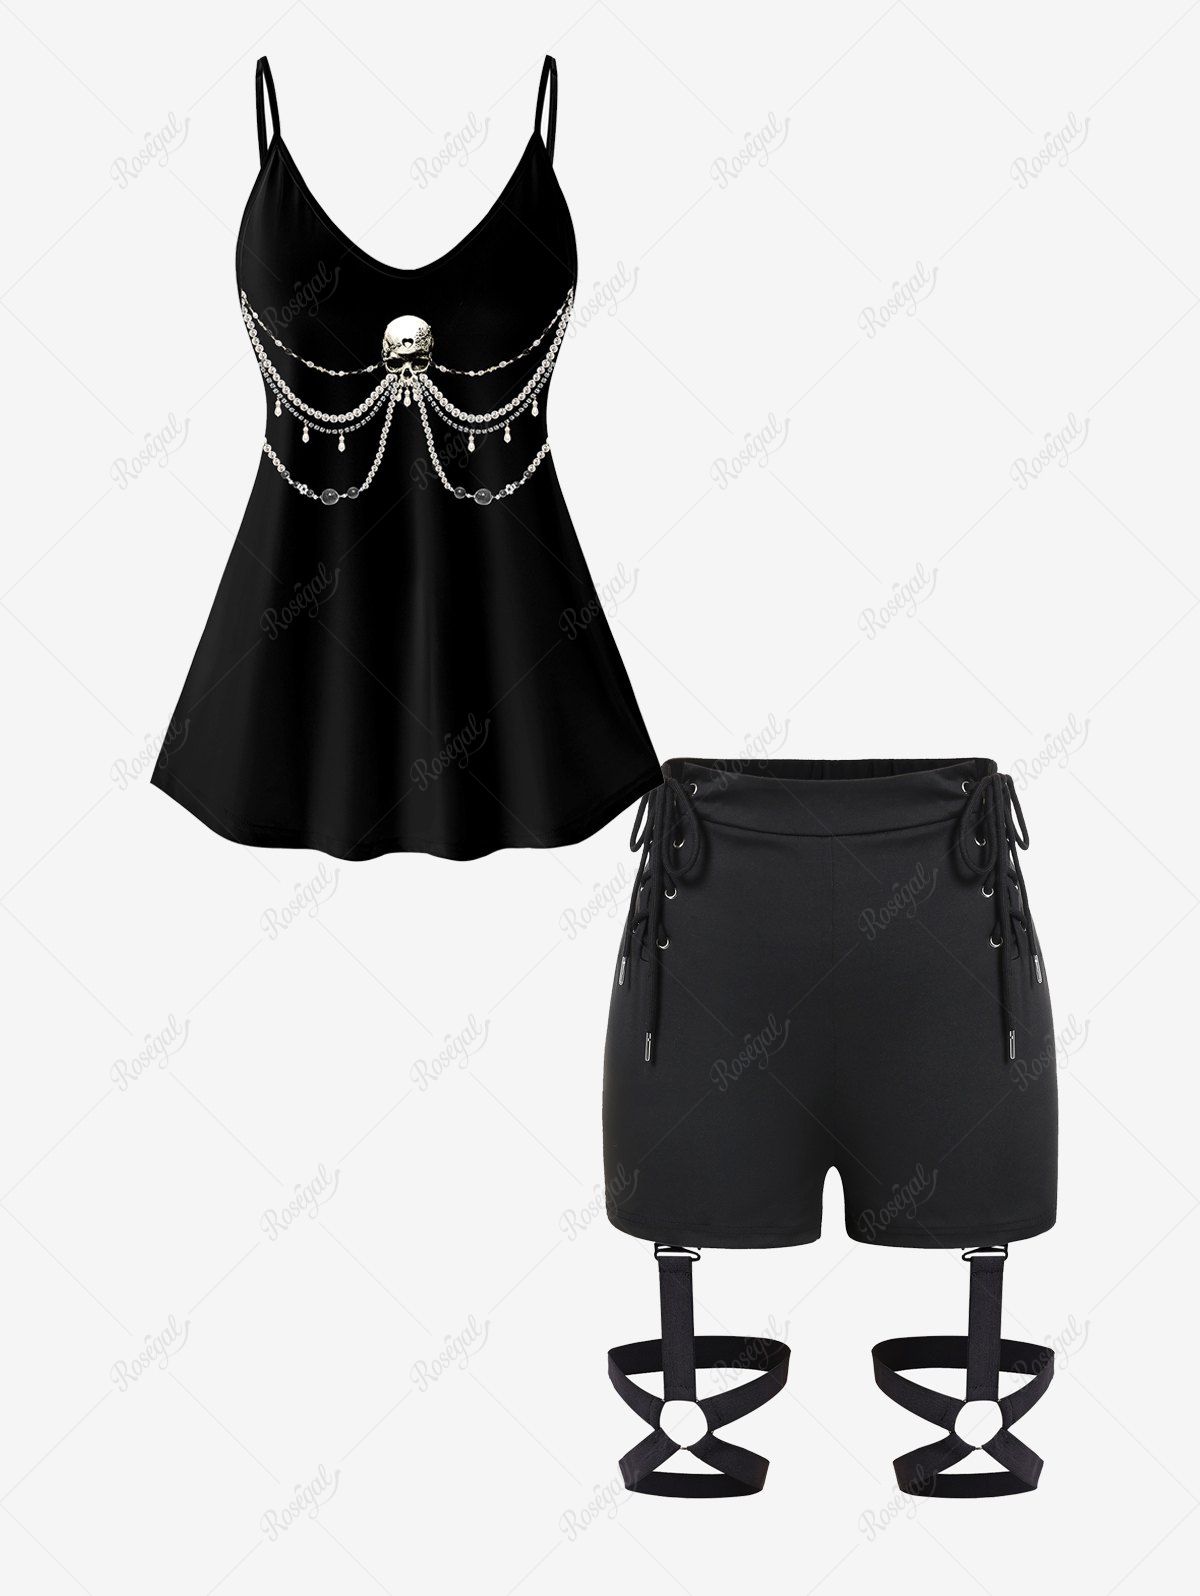 Buy Skull 3D Bead Rhinestone Print Cami Top And Lace-up Rings Garter Shorts Gothic Outfit  